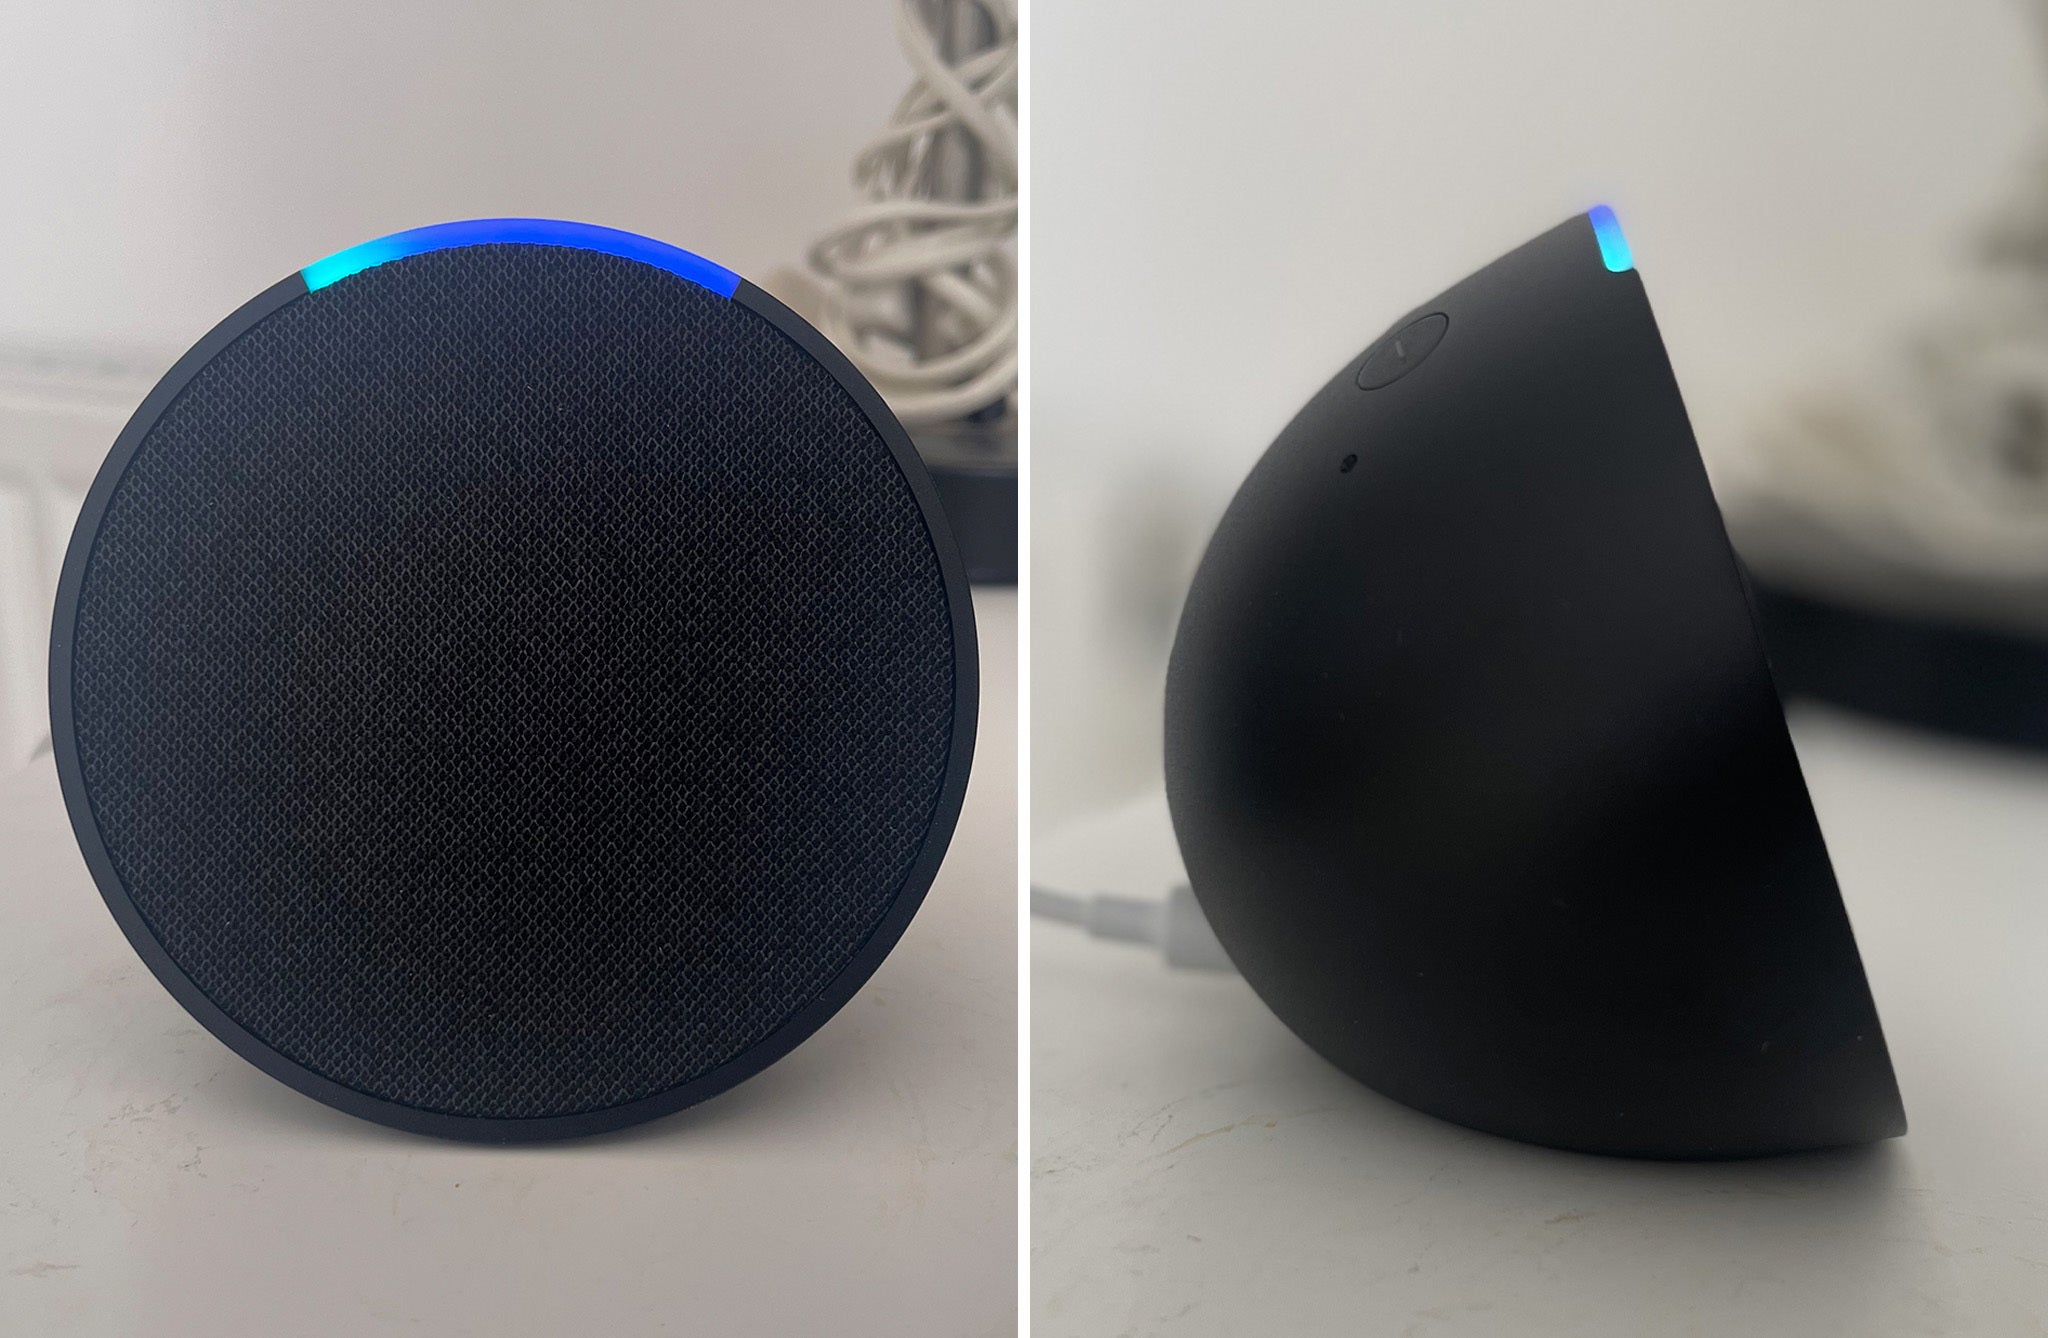 The Amazon Echo Pop pictured from the front and the side